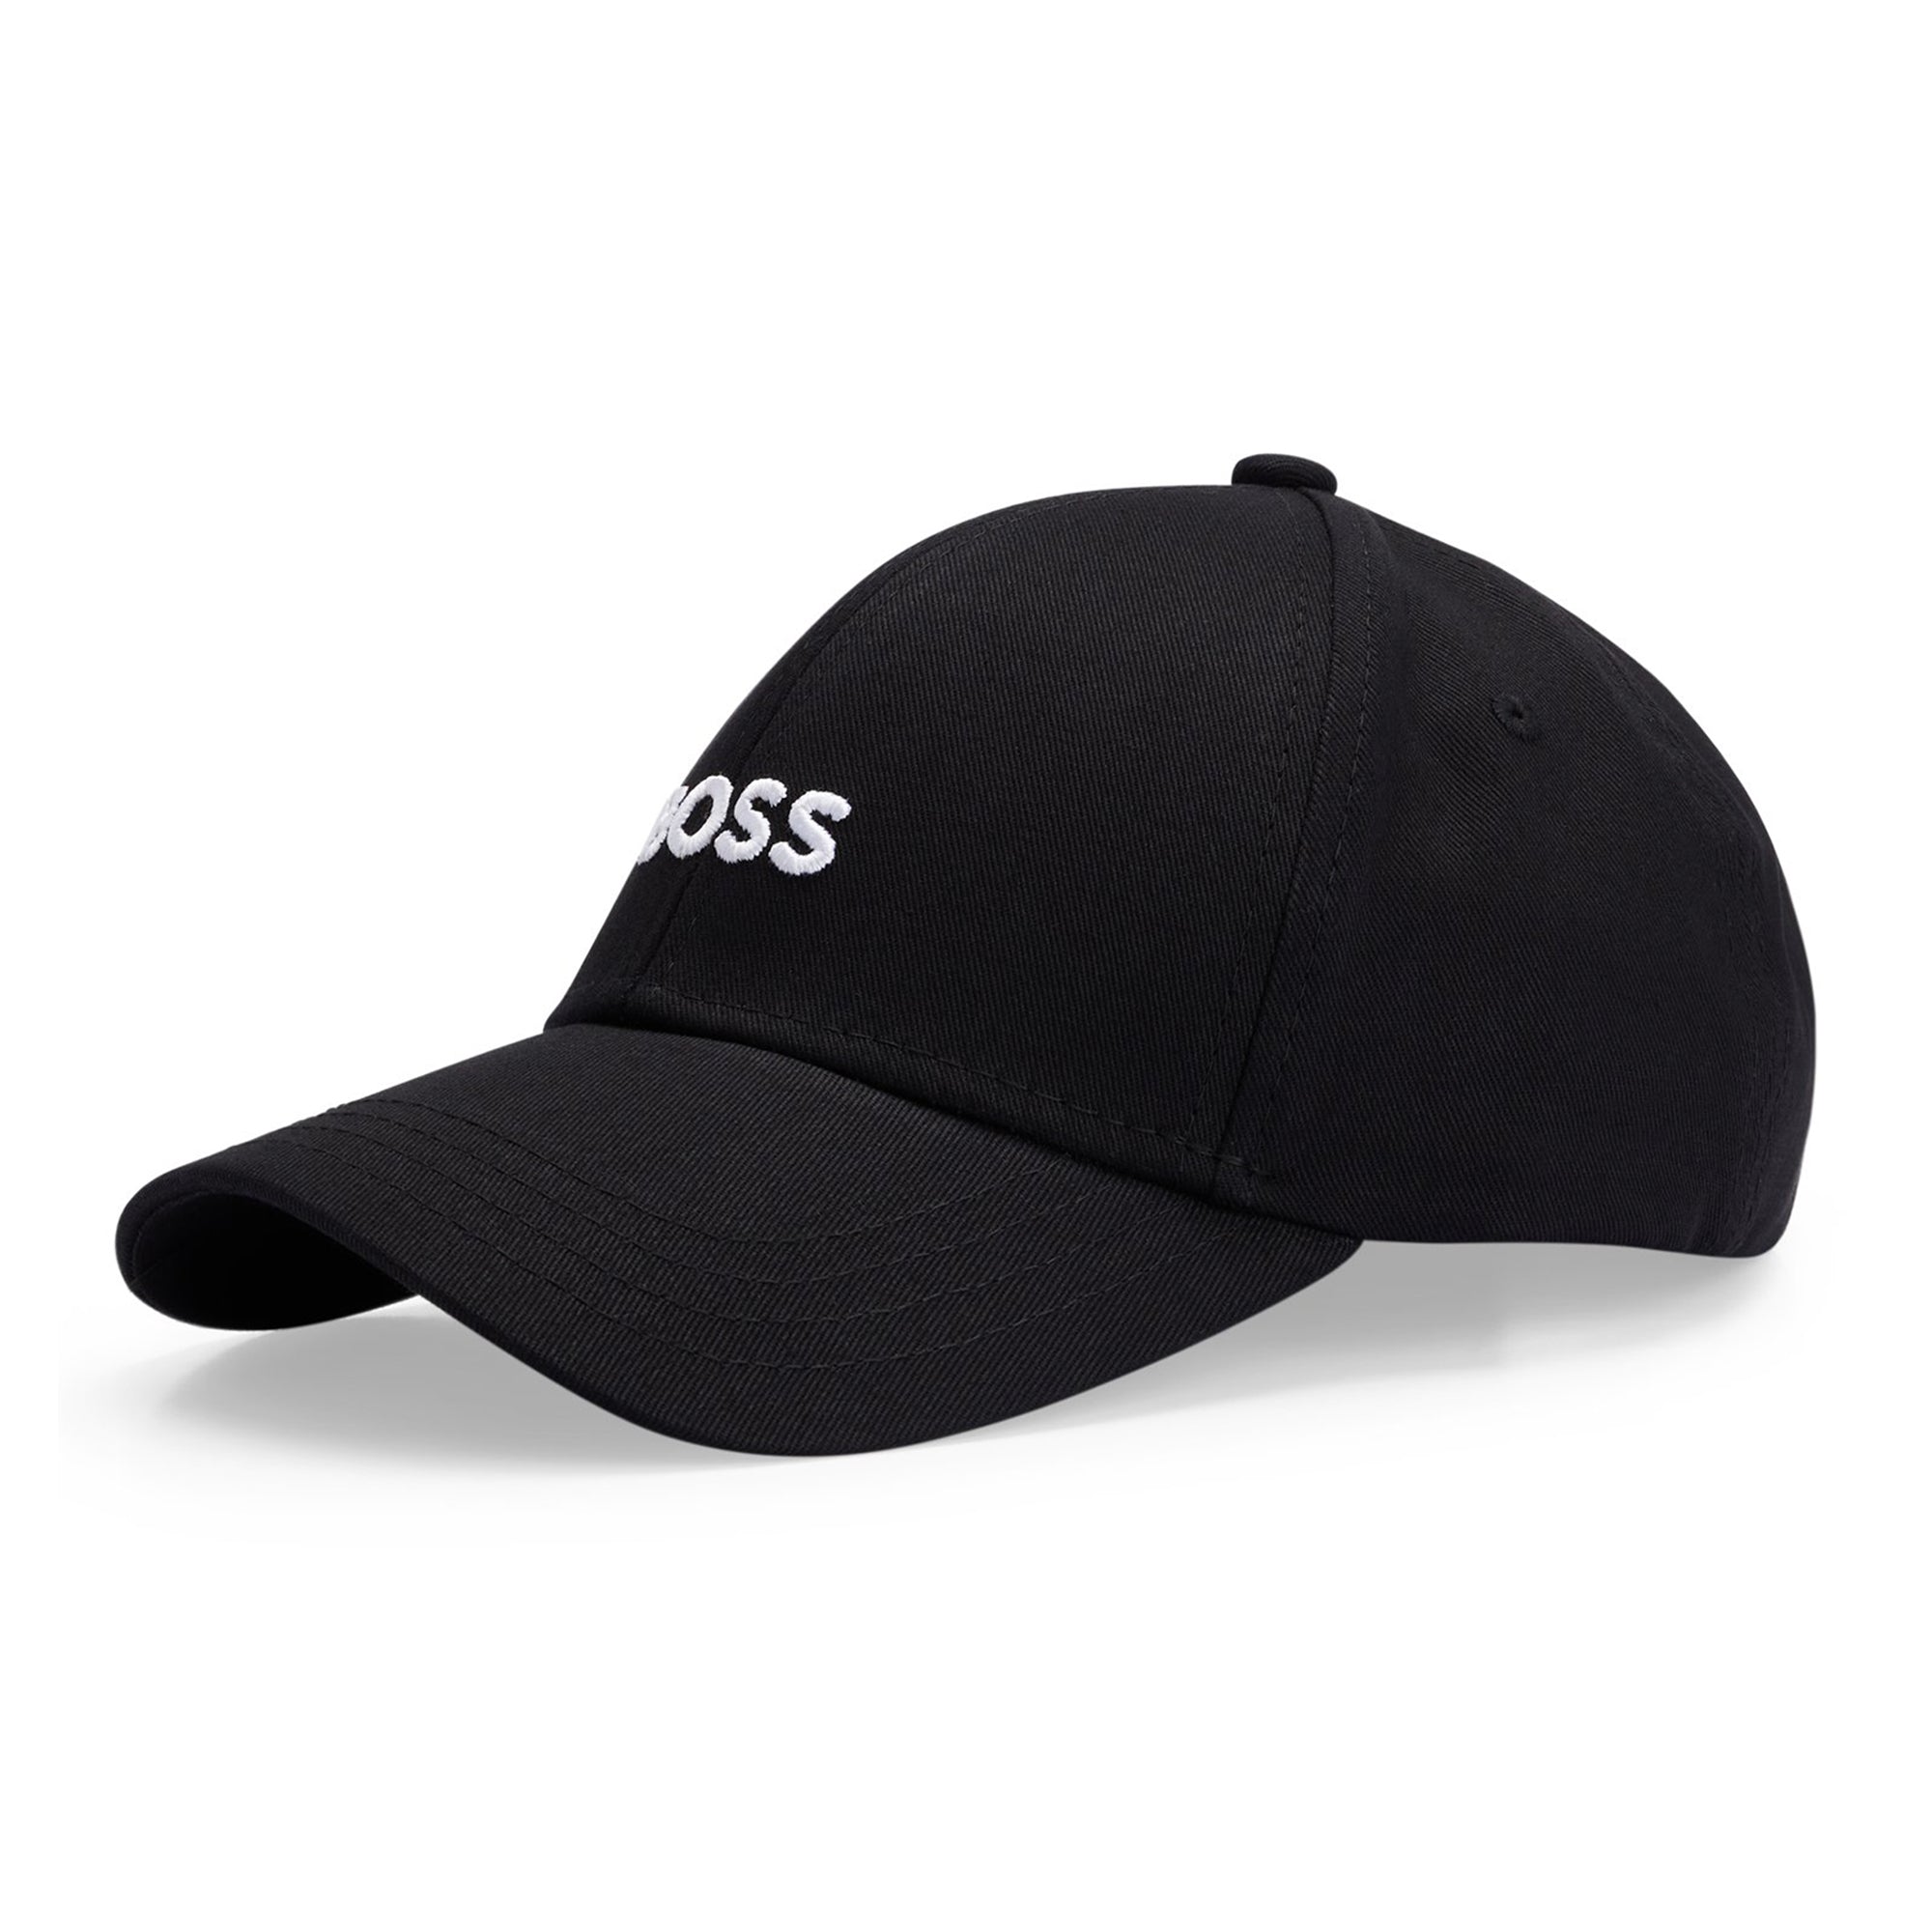 Boss Zed Embroidered Cotton Cap - Black